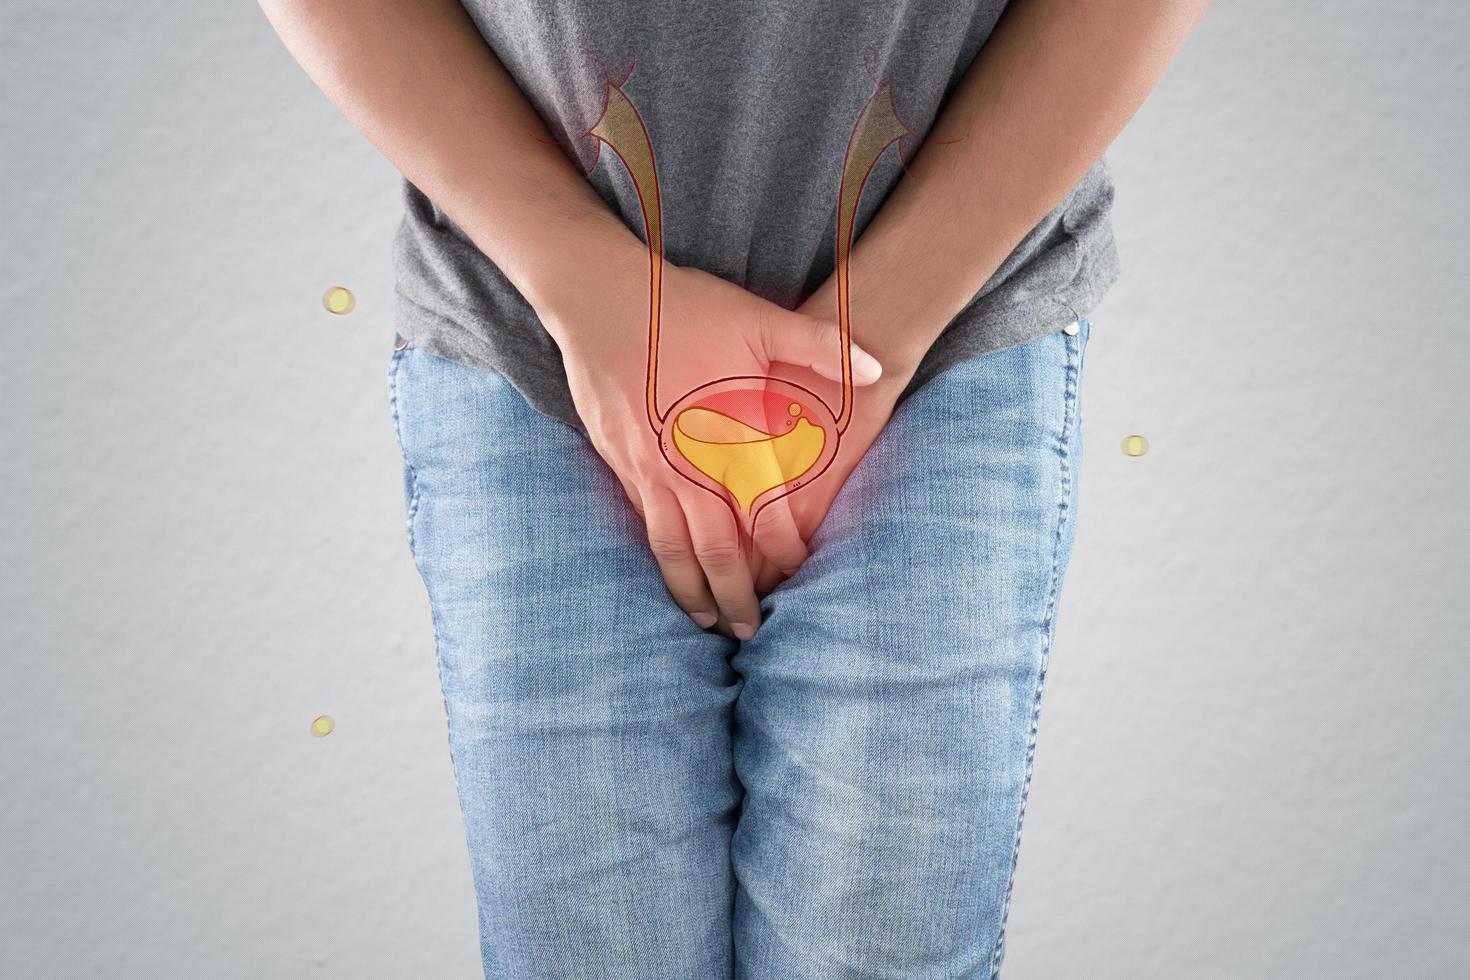 Man wants to pee and is holding his bladder, Urinary incontinence concept photo